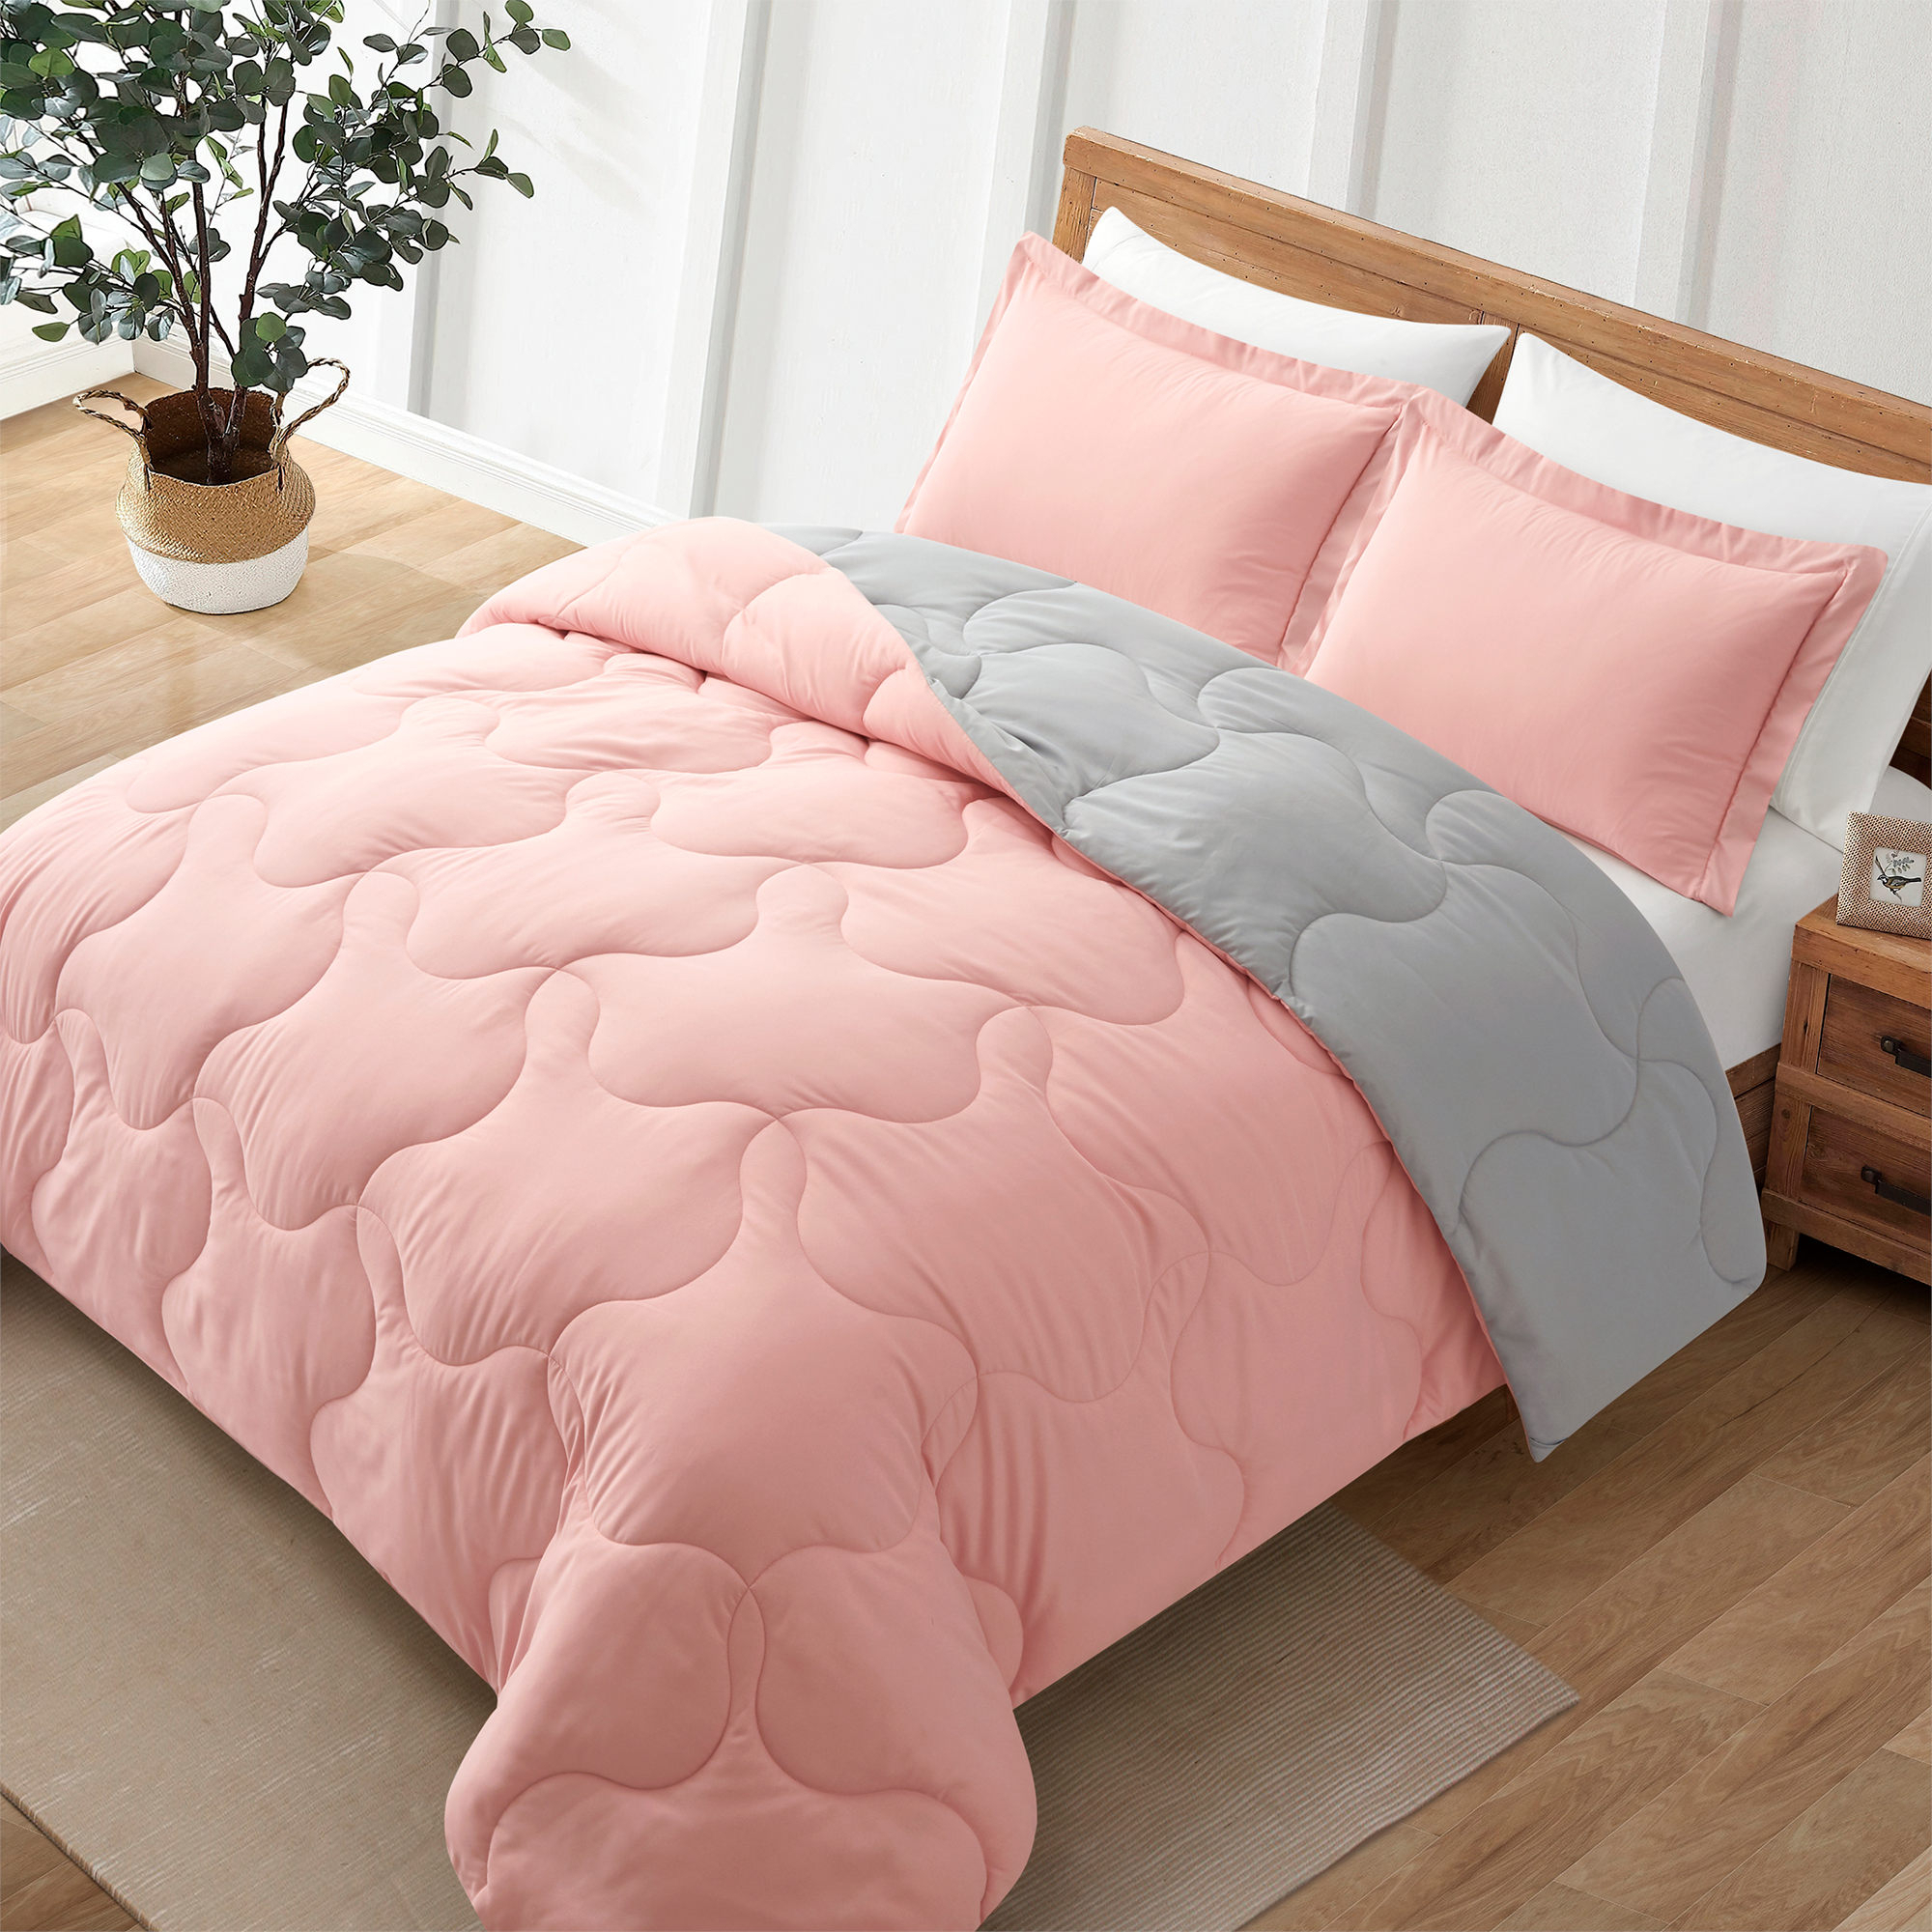 3 Or 2 Pieces Lightweight Reversible Comforter Set With Pillow Shams - Pink/Grey, Full/Queen